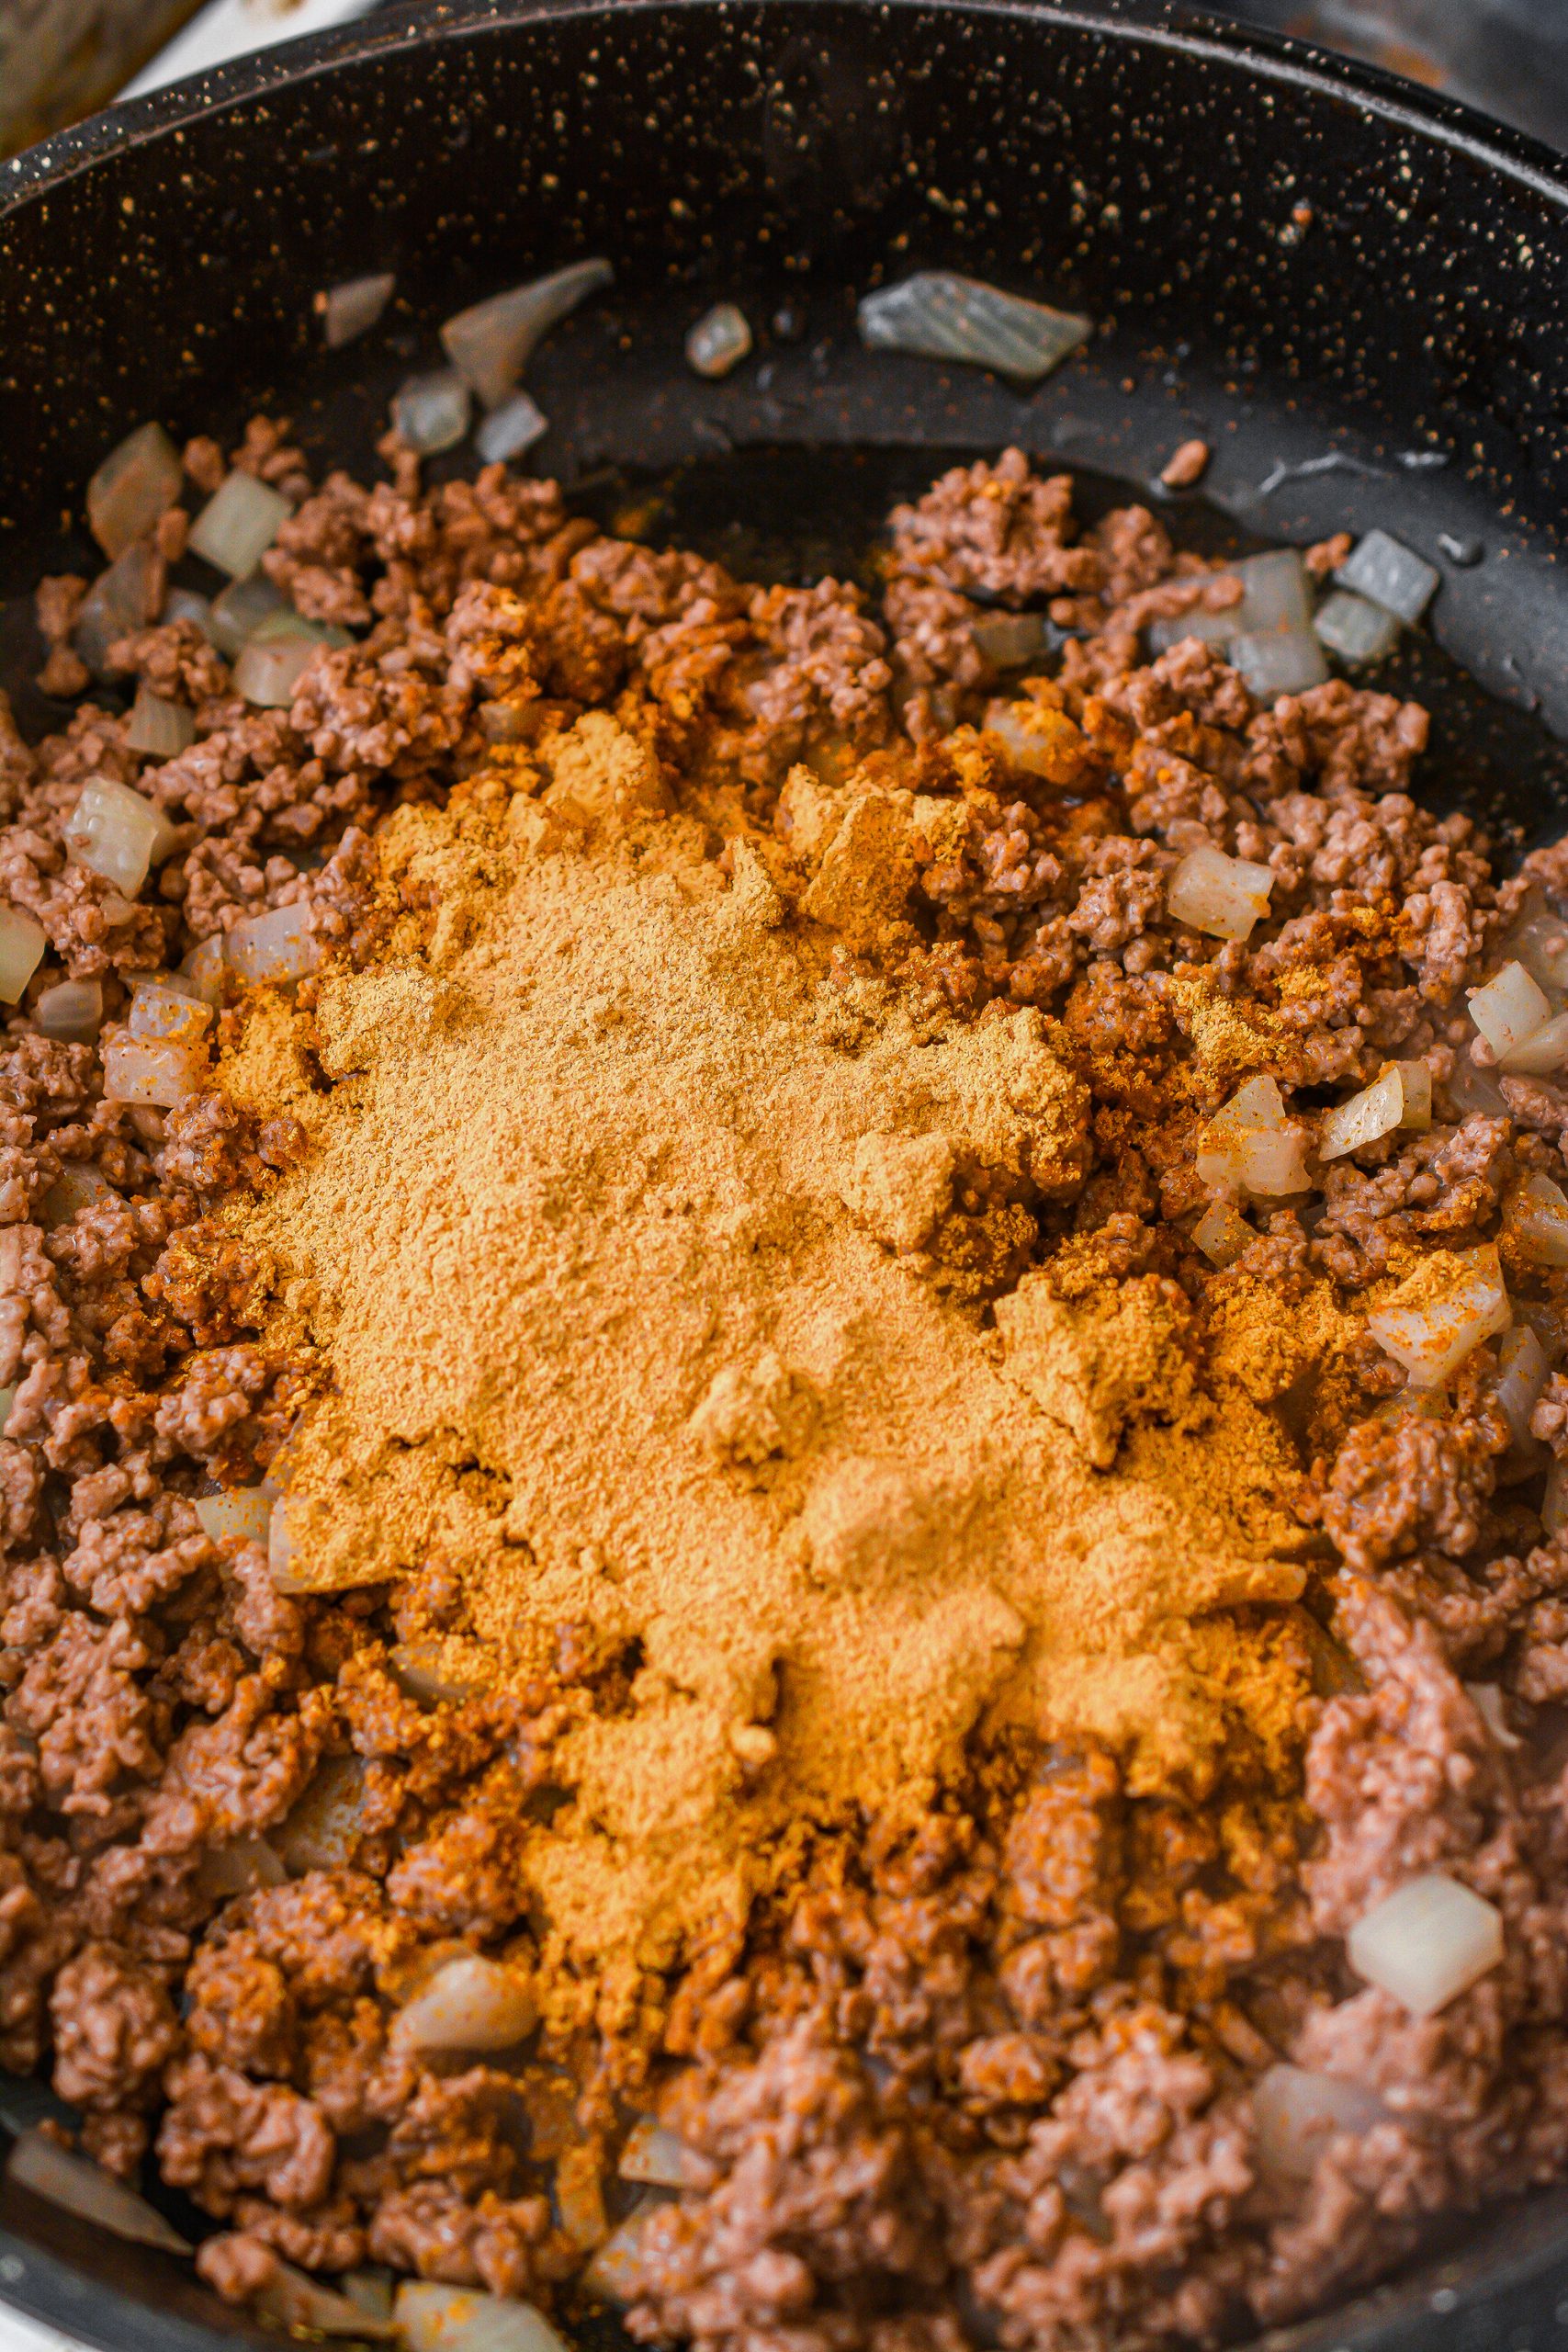  Lower the heat to low, and stir in the taco seasoning. Saute another few minutes, stirring to combine. 